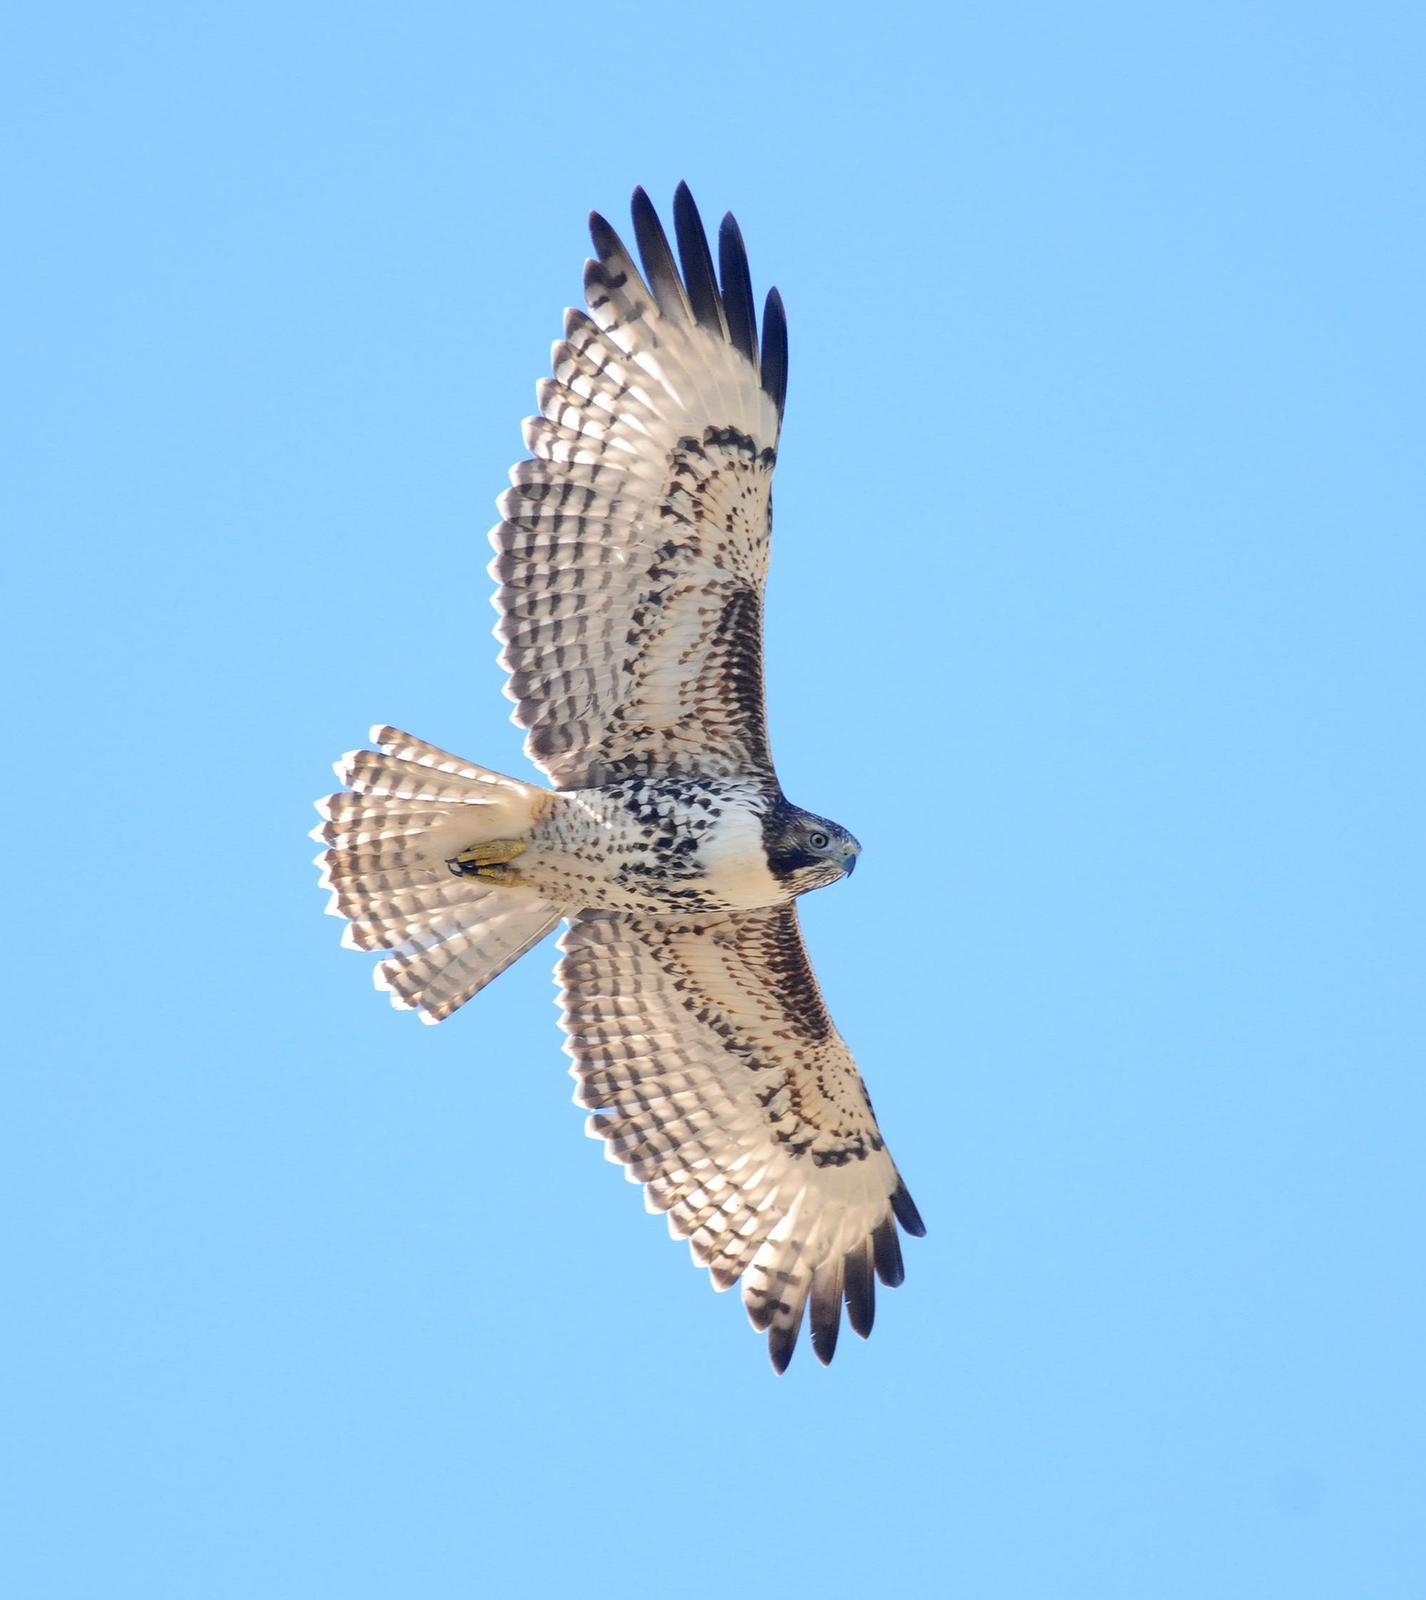 Red-tailed Hawk (calurus/alascensis) Photo by Steven Mlodinow